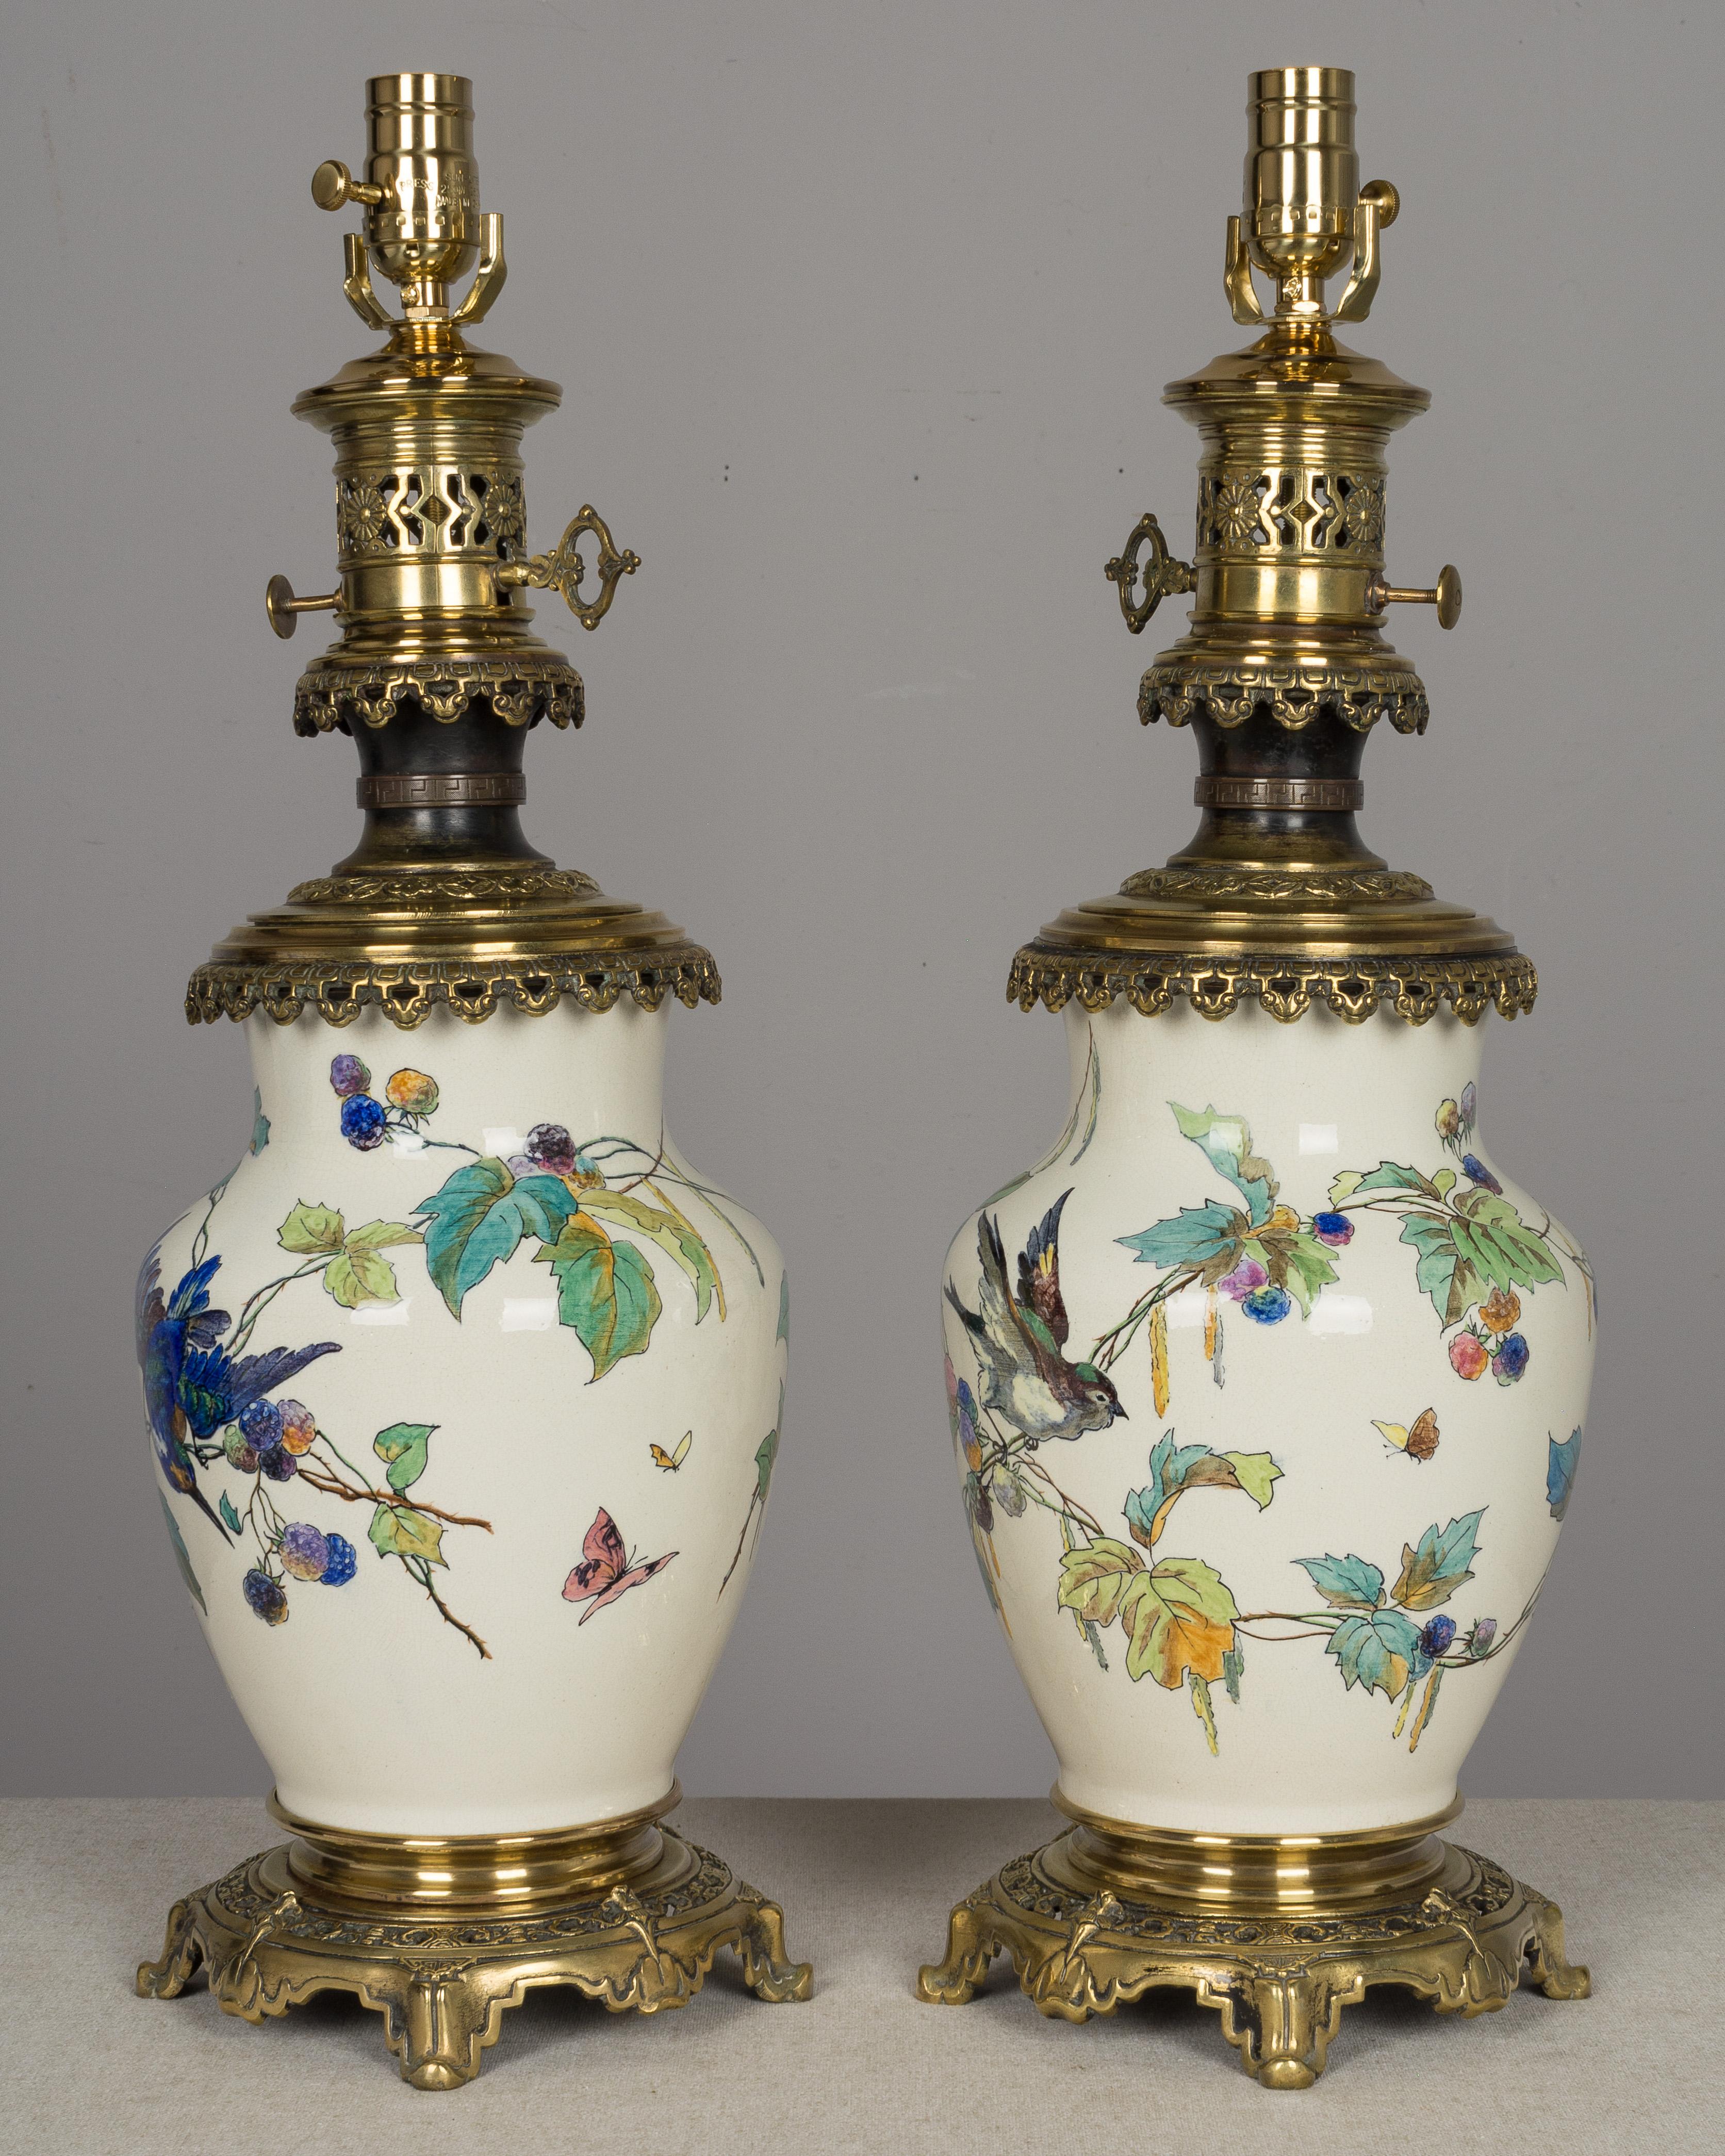 Pair of Bronze-Mounted Sevres Ceramic Lamps in the Manner of Theodore Deck 1